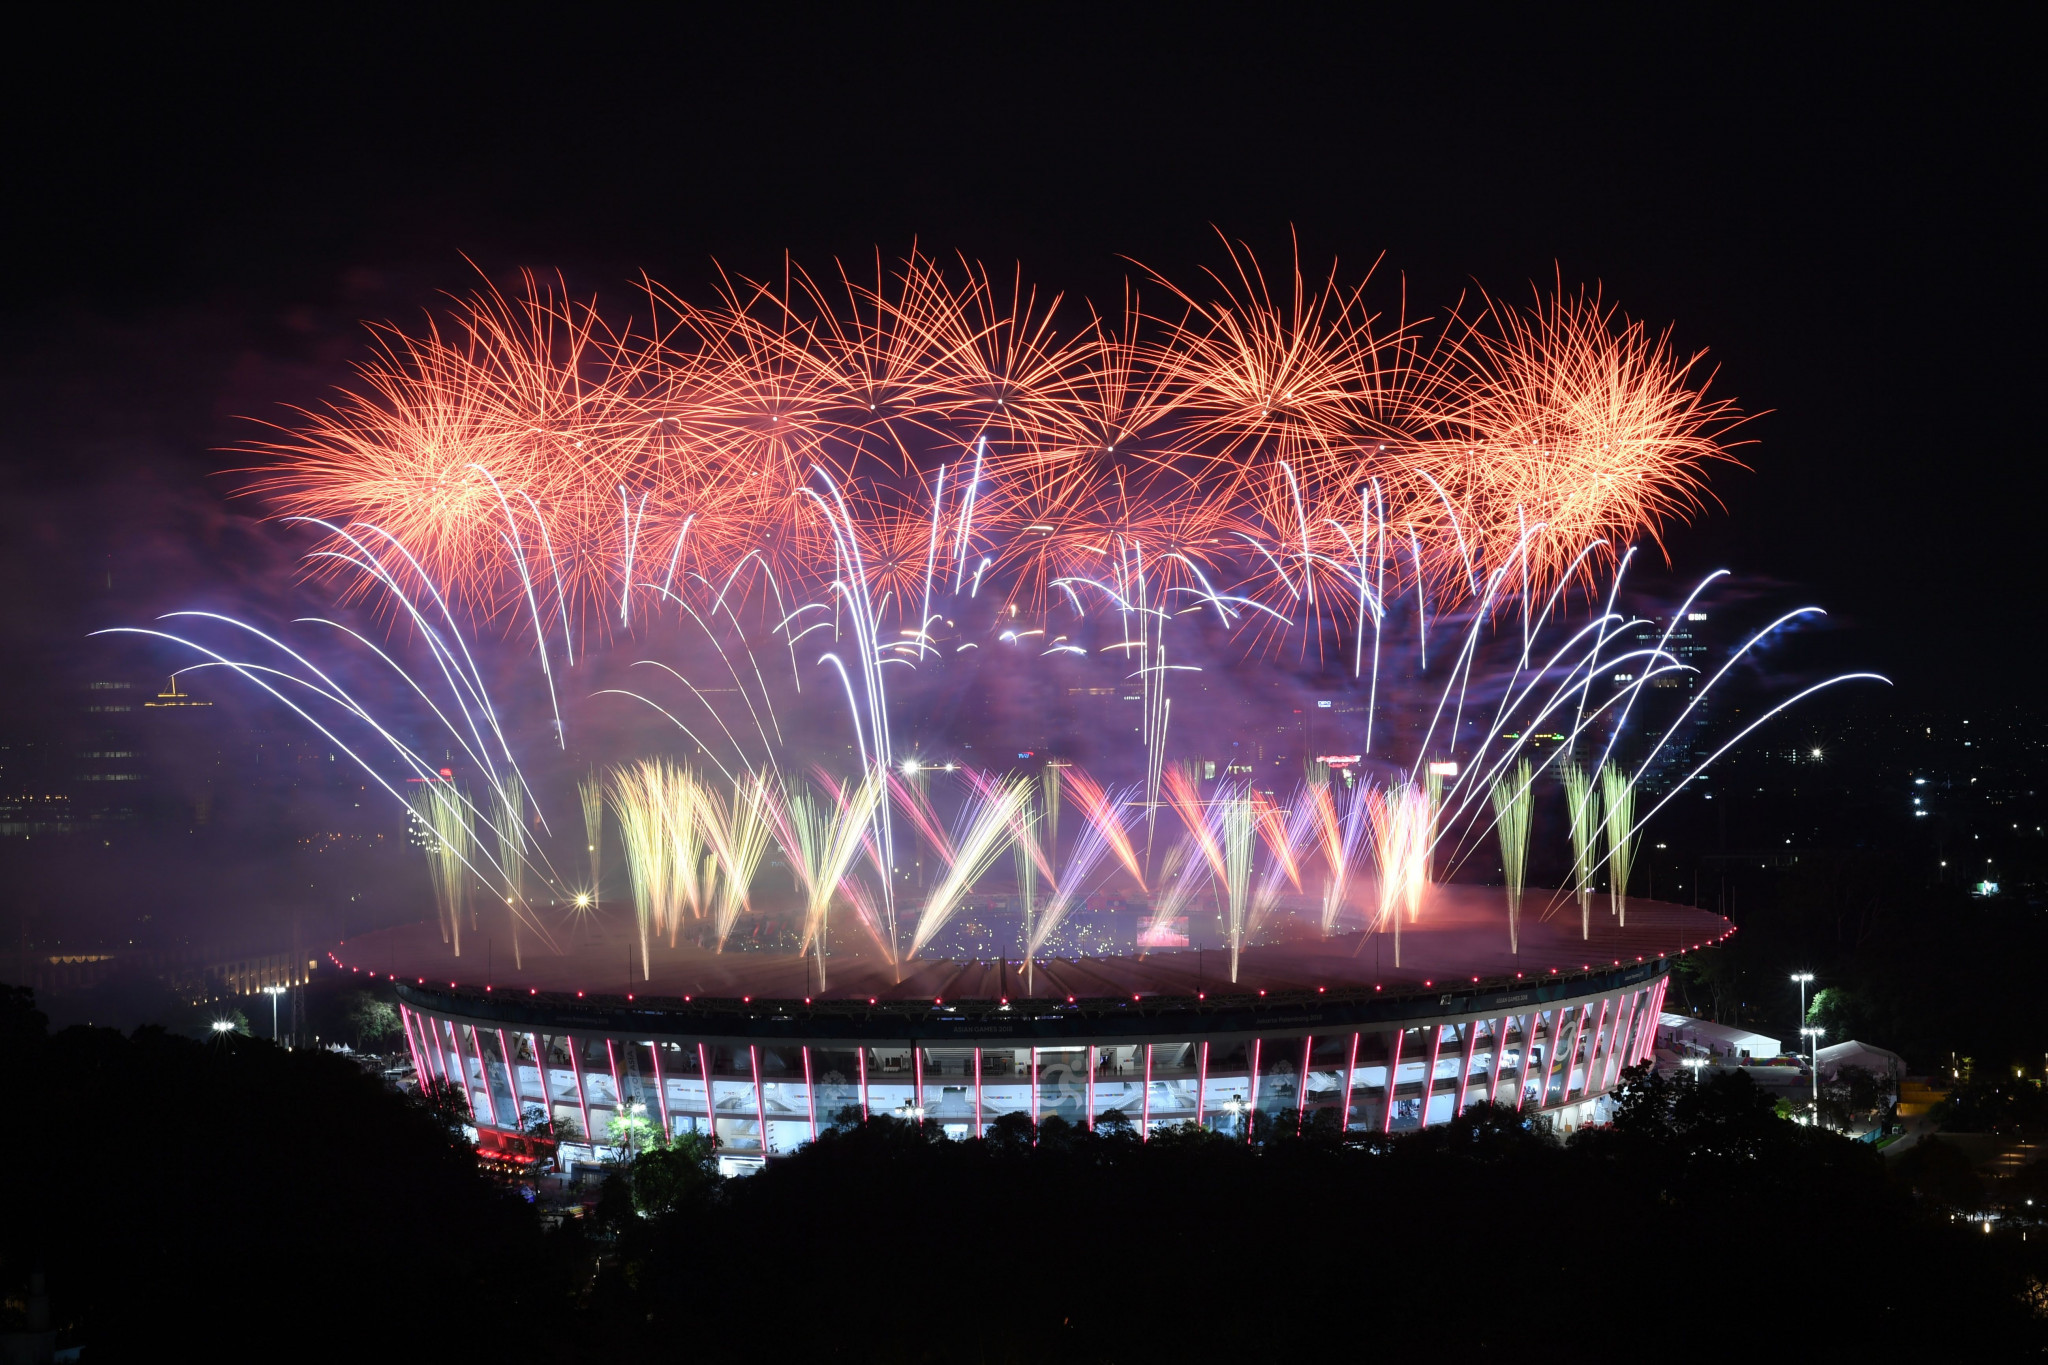 The Opening Ceremony will be held in Jakarta's Gelora Bung Karno Main Stadium, which also hosted the Ceremonies of the 2018 Asian Games ©Getty Images